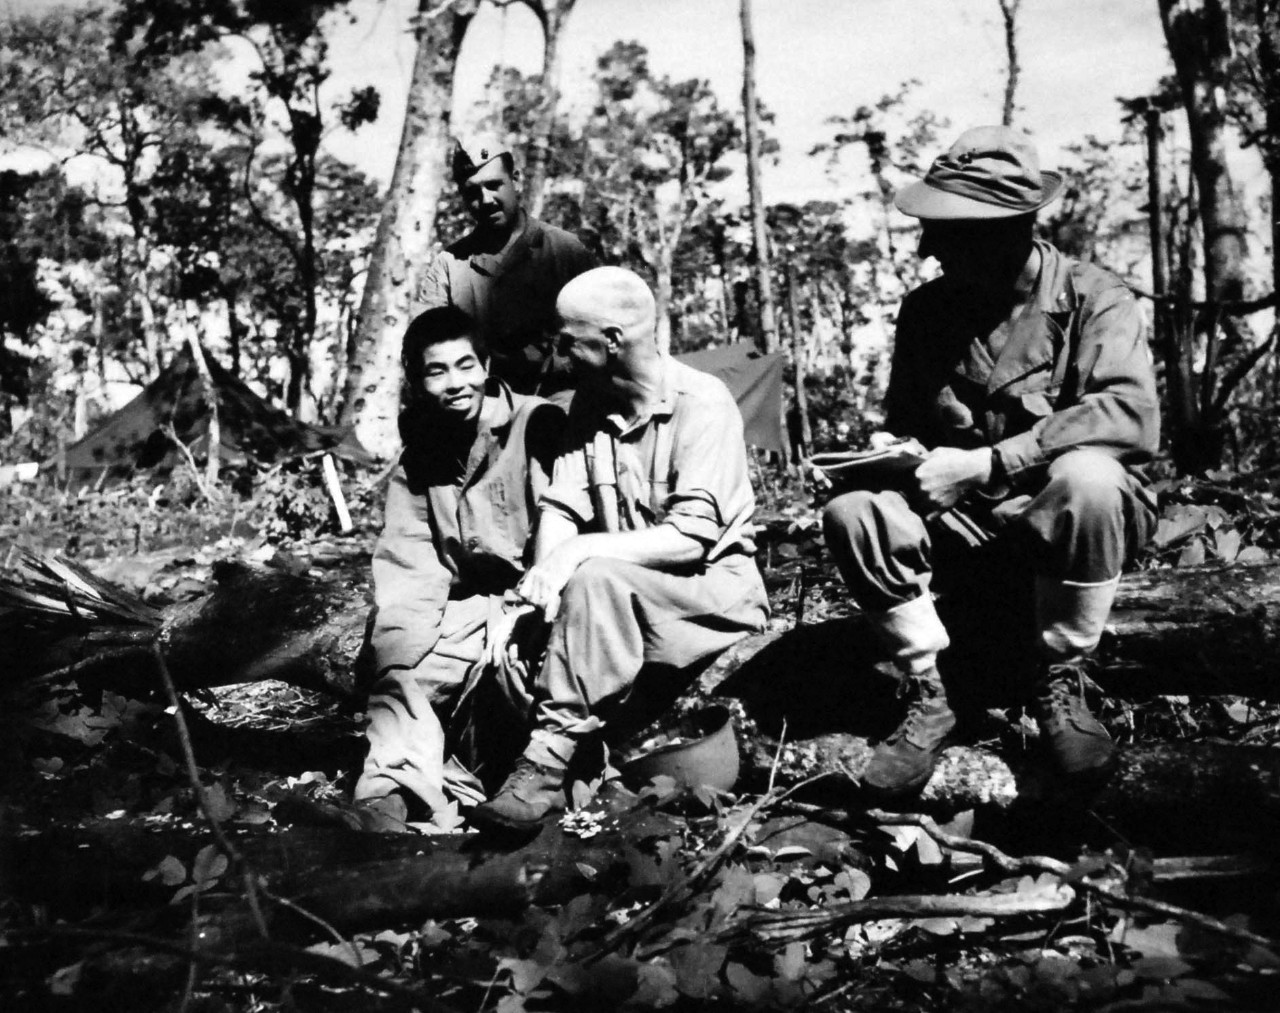 127-GW-971-76795:   Battle of Cape Gloucester, New Britain, December 1943-January 1944.   Standing is MP Corp, Edwin Yarbrough.  Sitting (left to right):  Japanese prisoner Major Sherwood F. Moran (interpreter), talks with Japanese prisoner captured on Cape Gloucester, who happens to be from the same locality as Major Moran who spent twenty years in Japan before the war.    Photographed by Sergeant R.M. Howard, USMCR, 20 January 1944.  Official U.S. Marine Corps Photograph, now in the collections of the National Archives.   (2014/7/9).